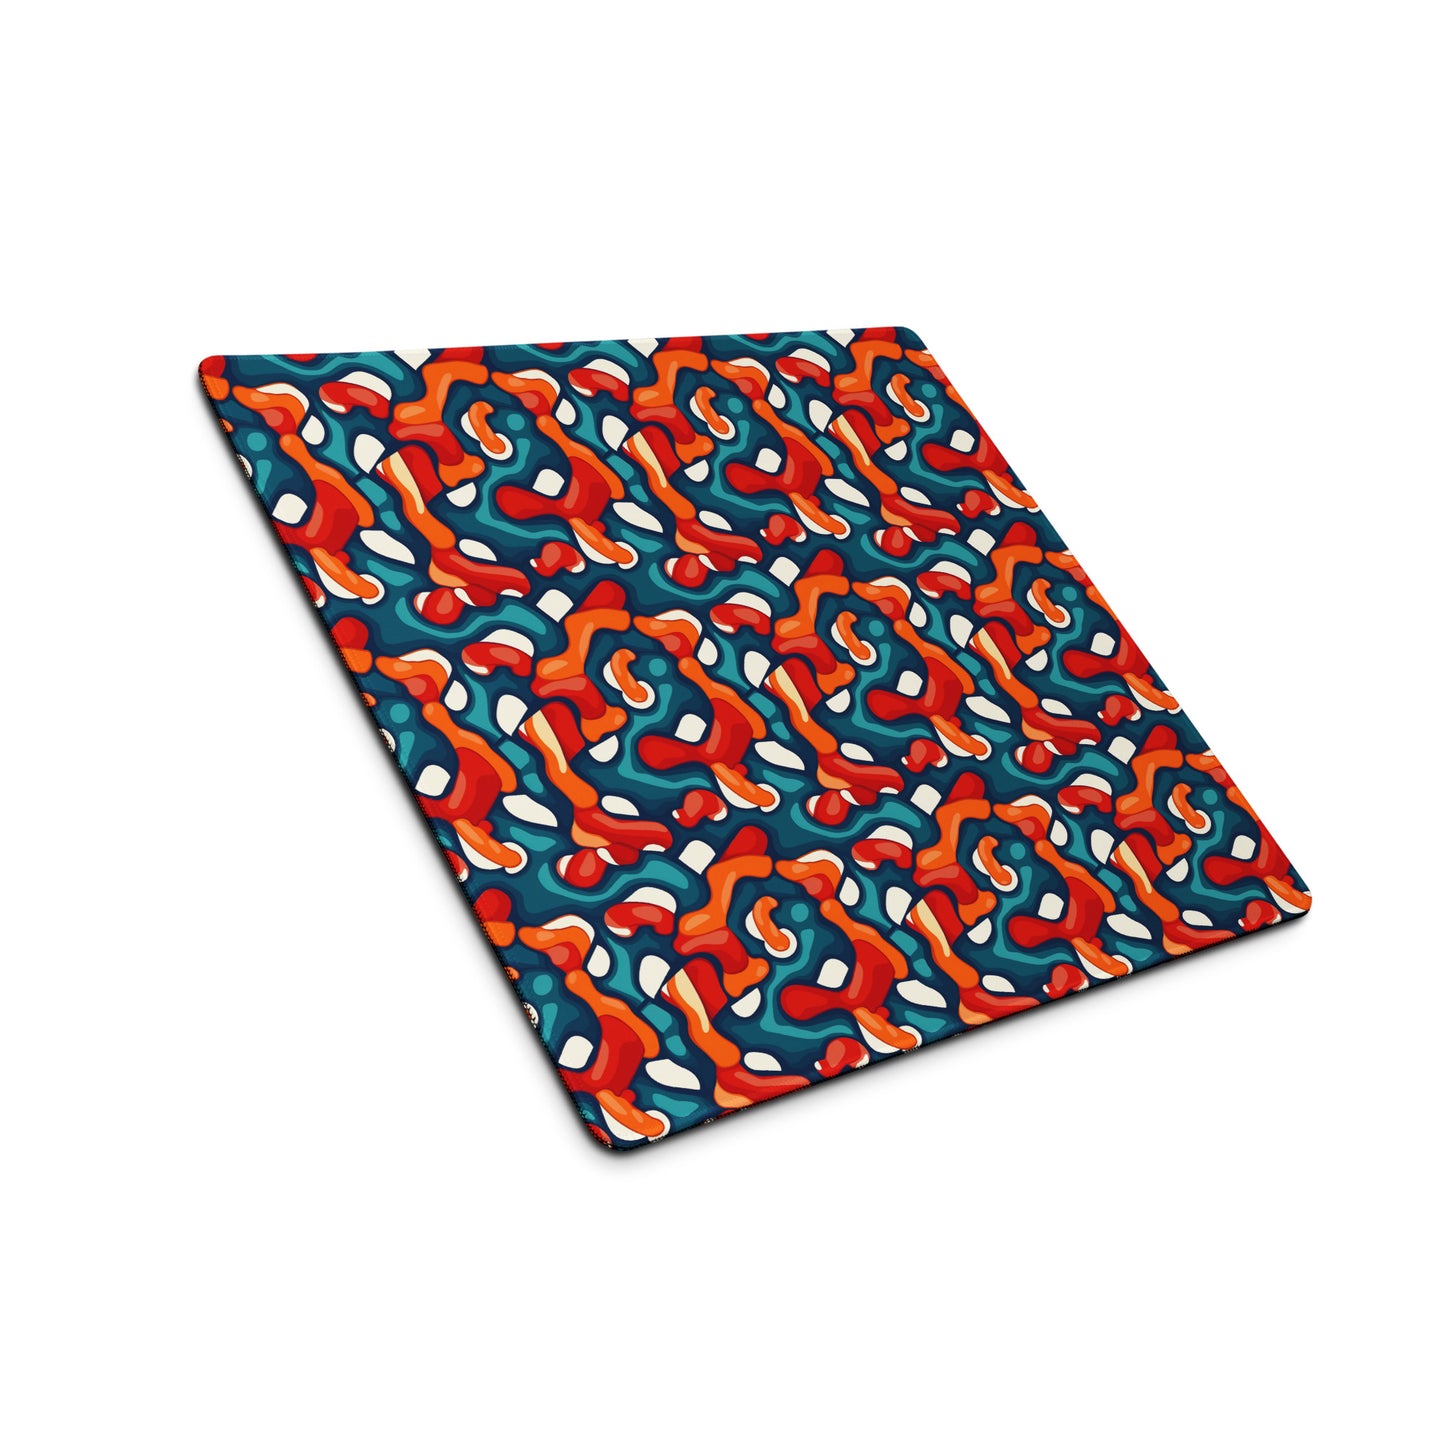 A 18" x 16" desk pad with abstract line art on it shown at an angle. Red, Teal and Orange in color.